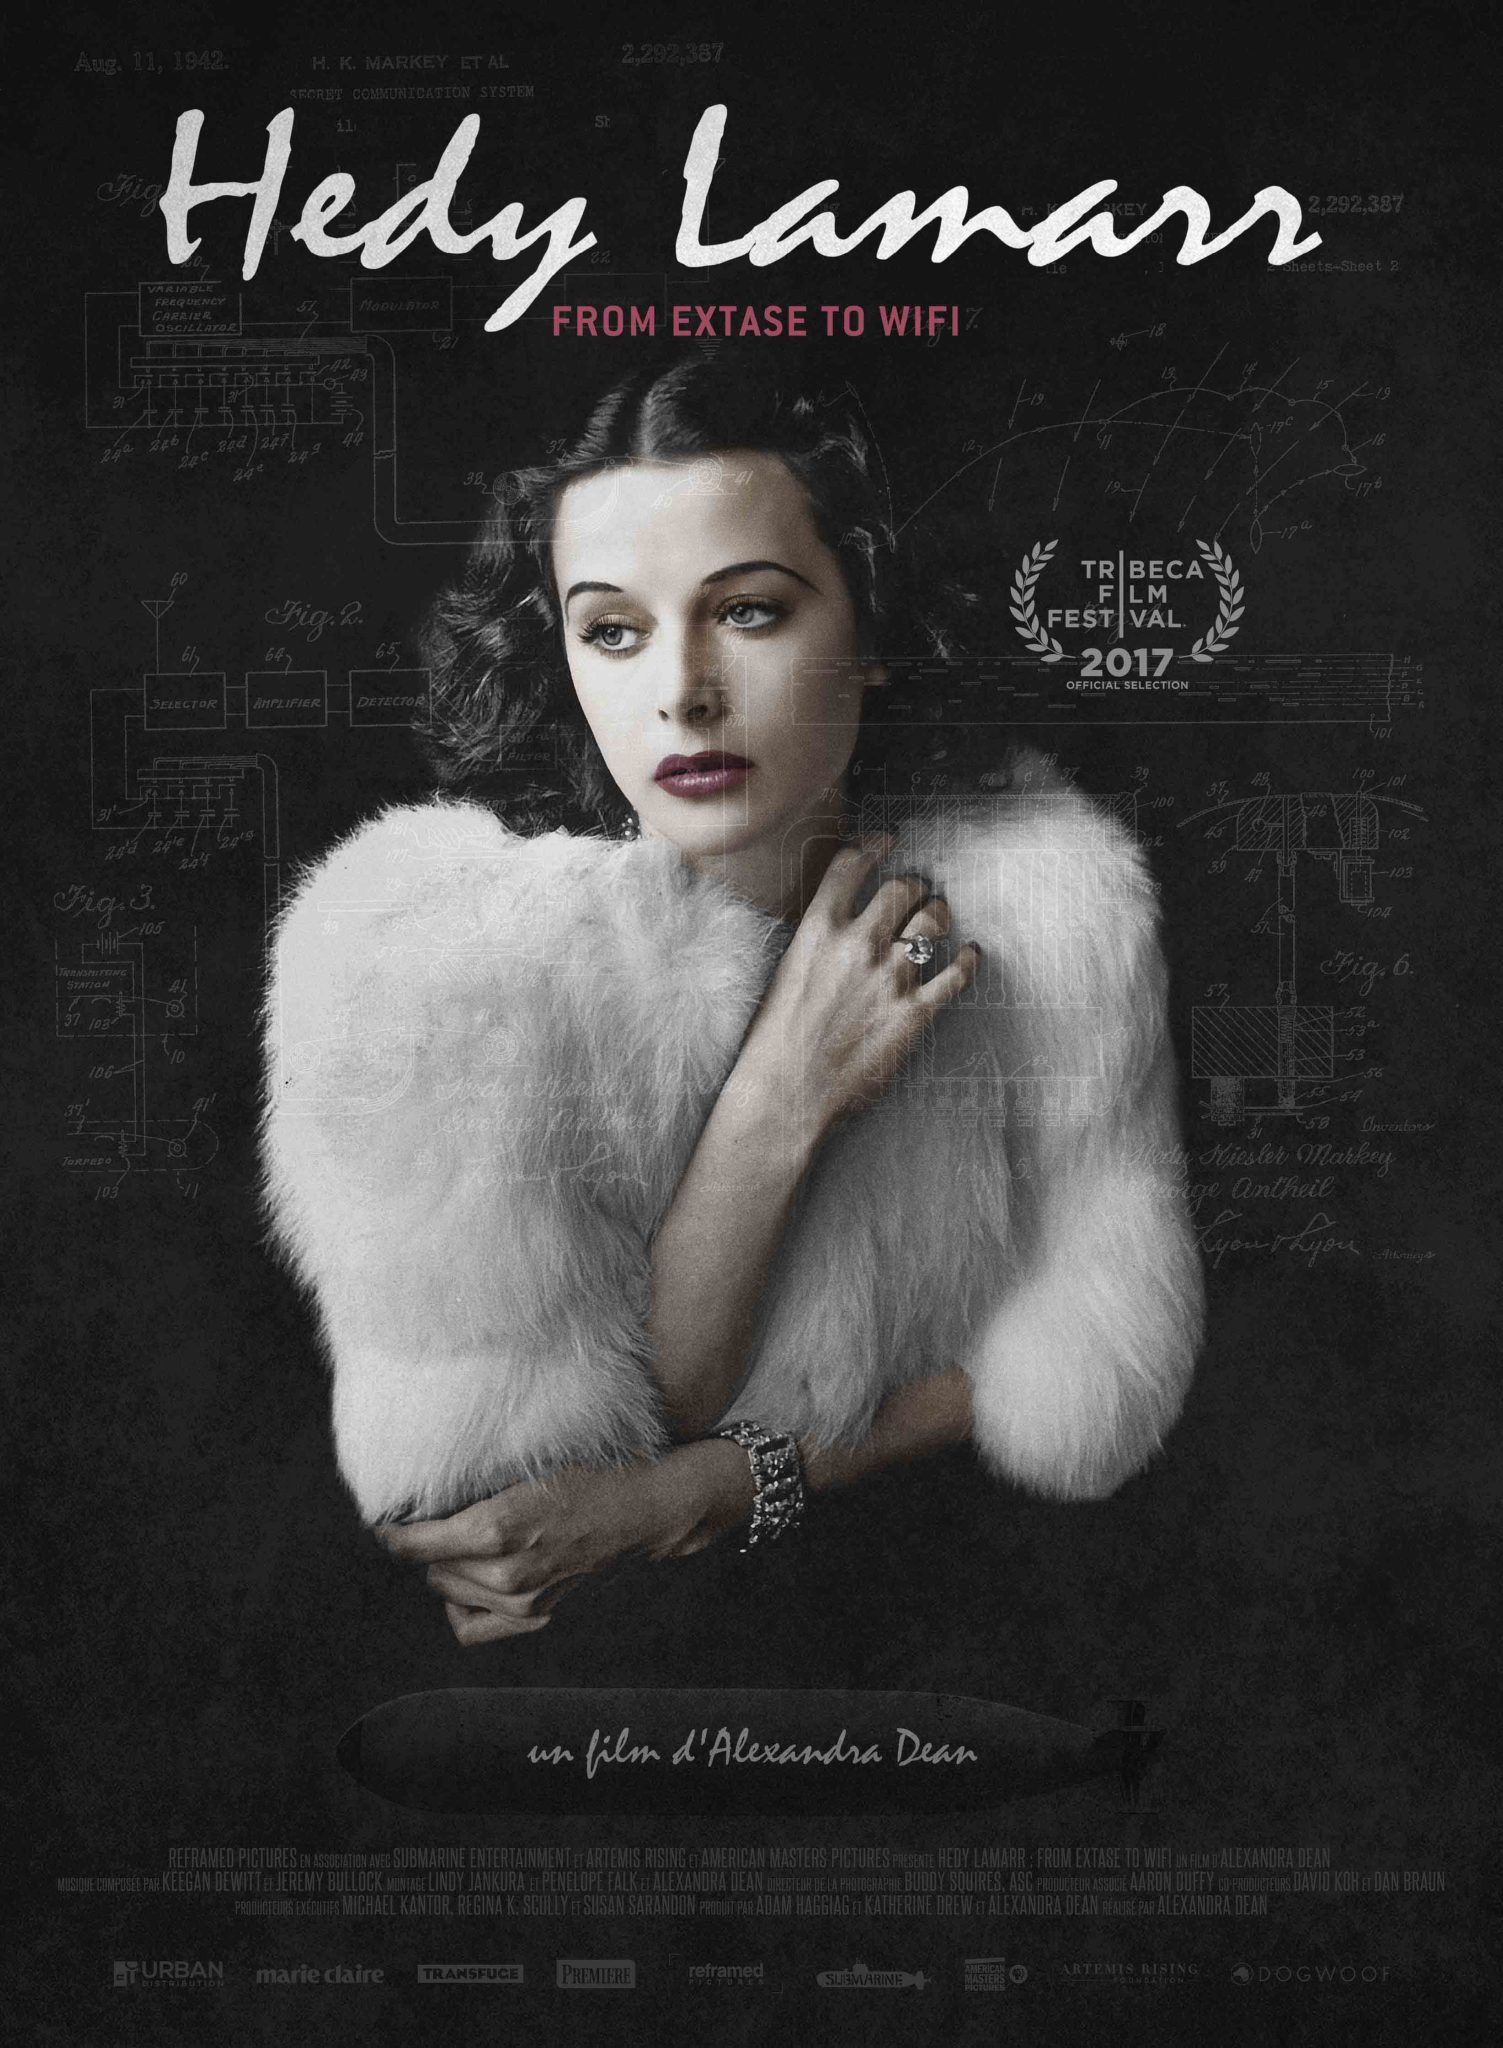 Hedy Lamarr from extase to wifi d'Alexandra Dean affiche